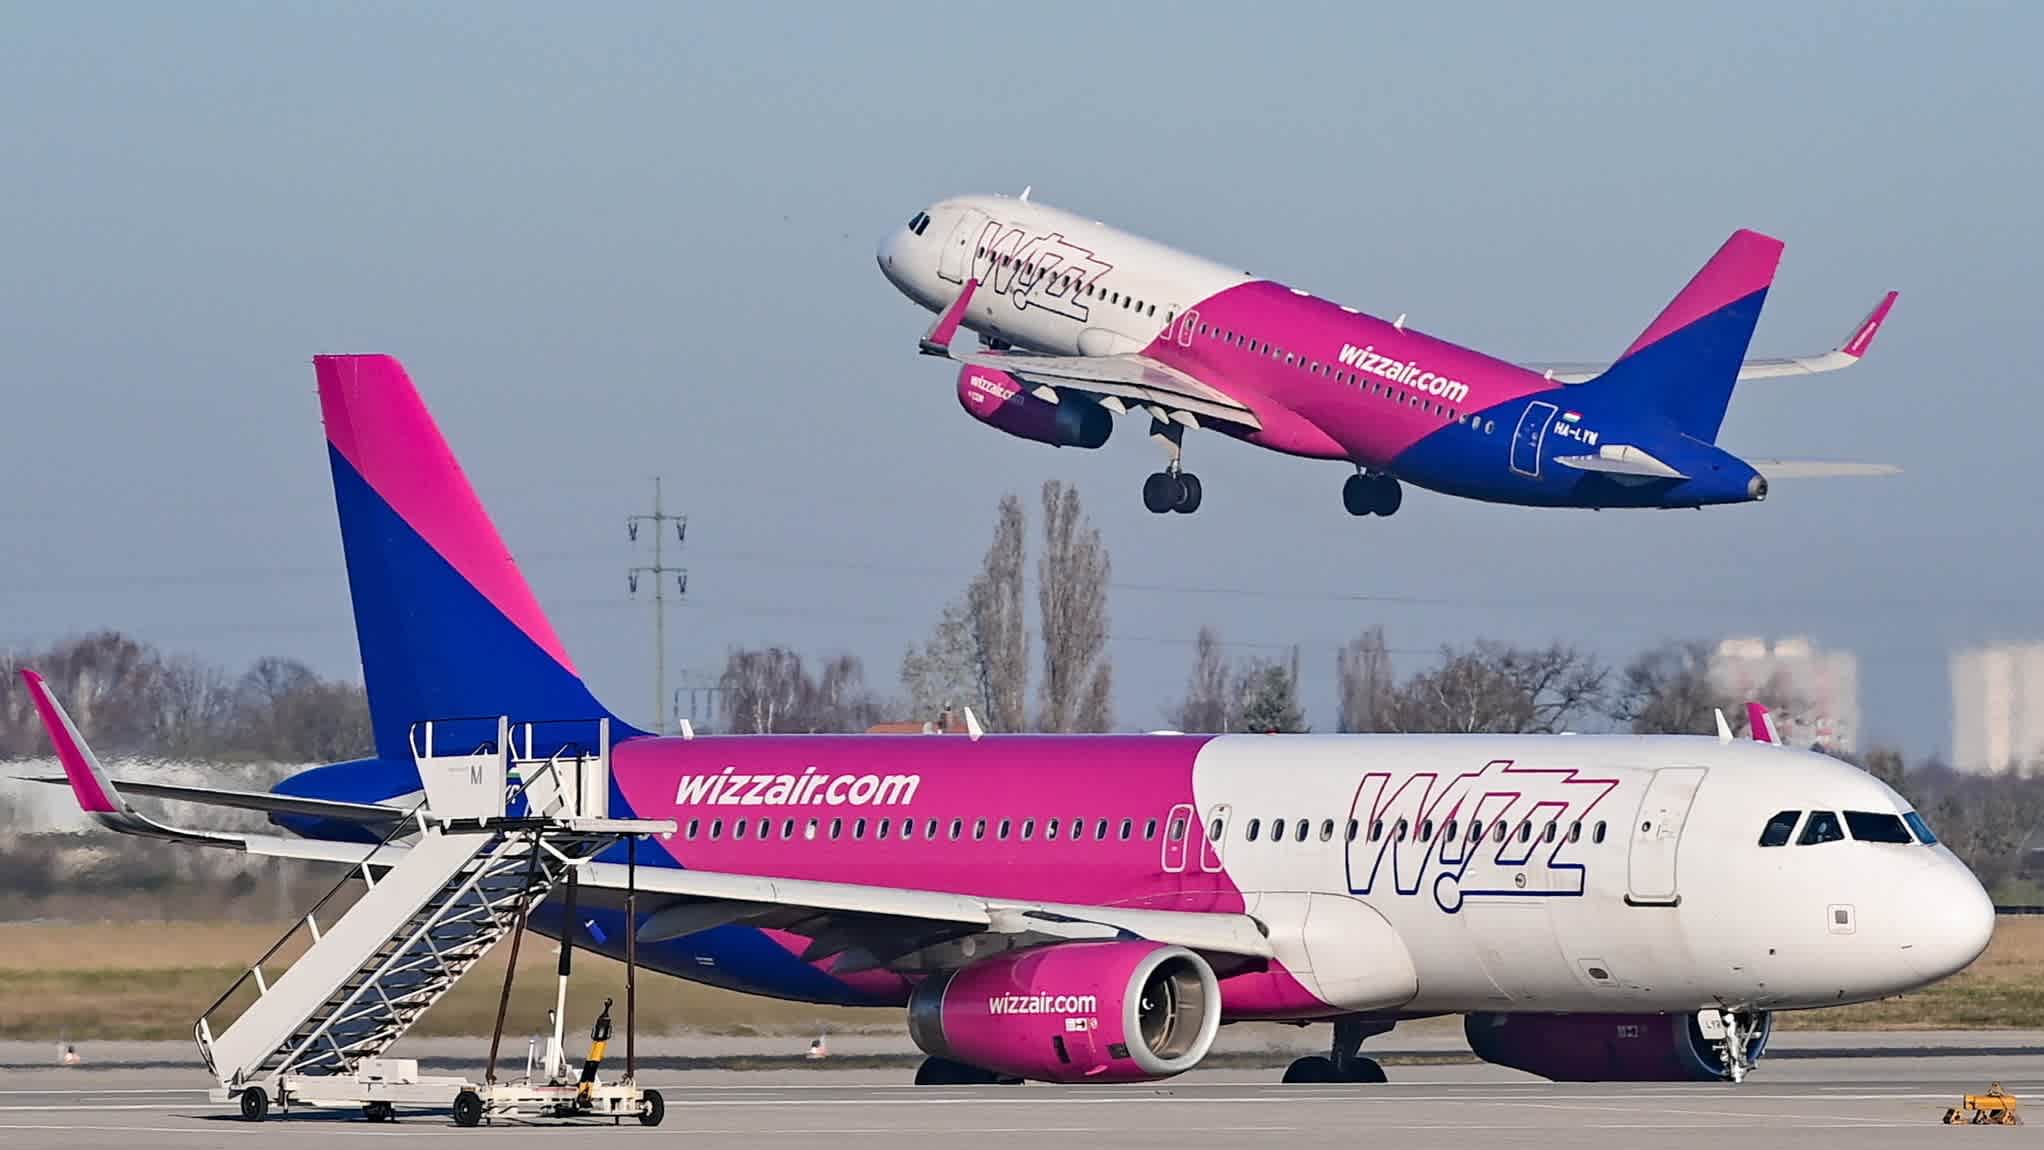 Wizz Air expects return to profit after putting fuel hedging fiasco behind it